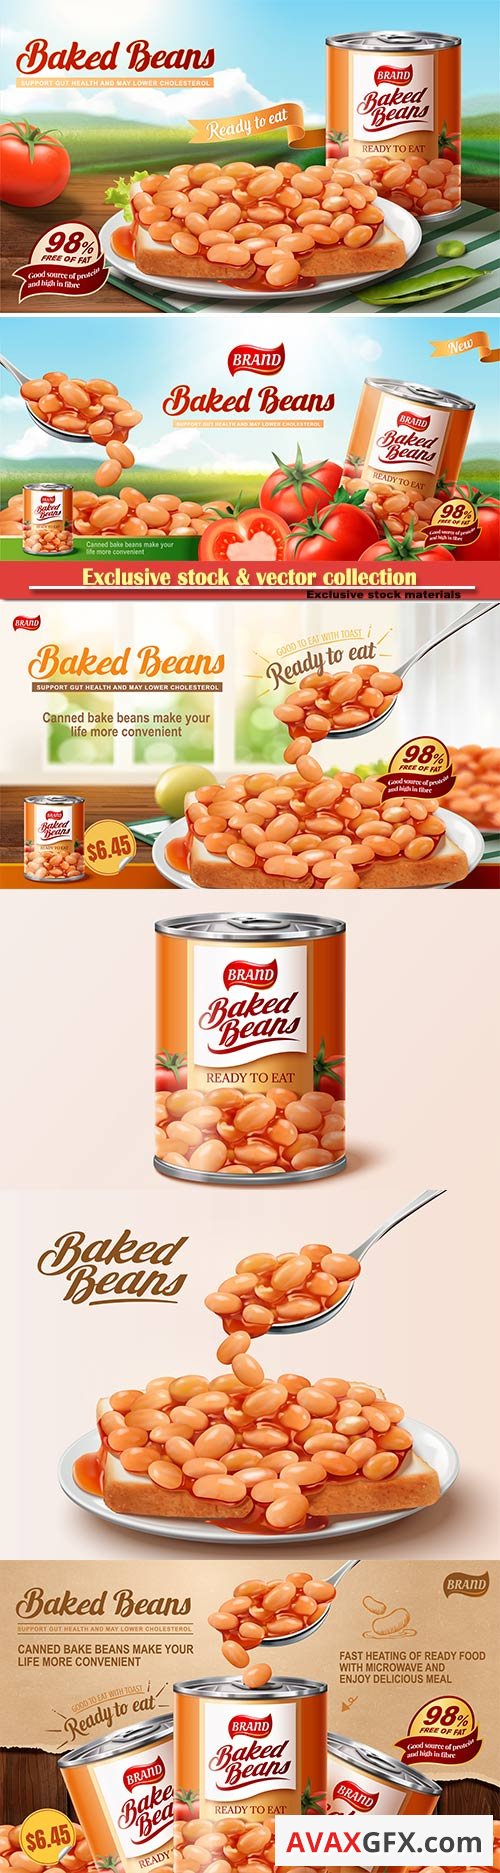 Baked beans ads with delicious beans on toast in 3d vector illustration